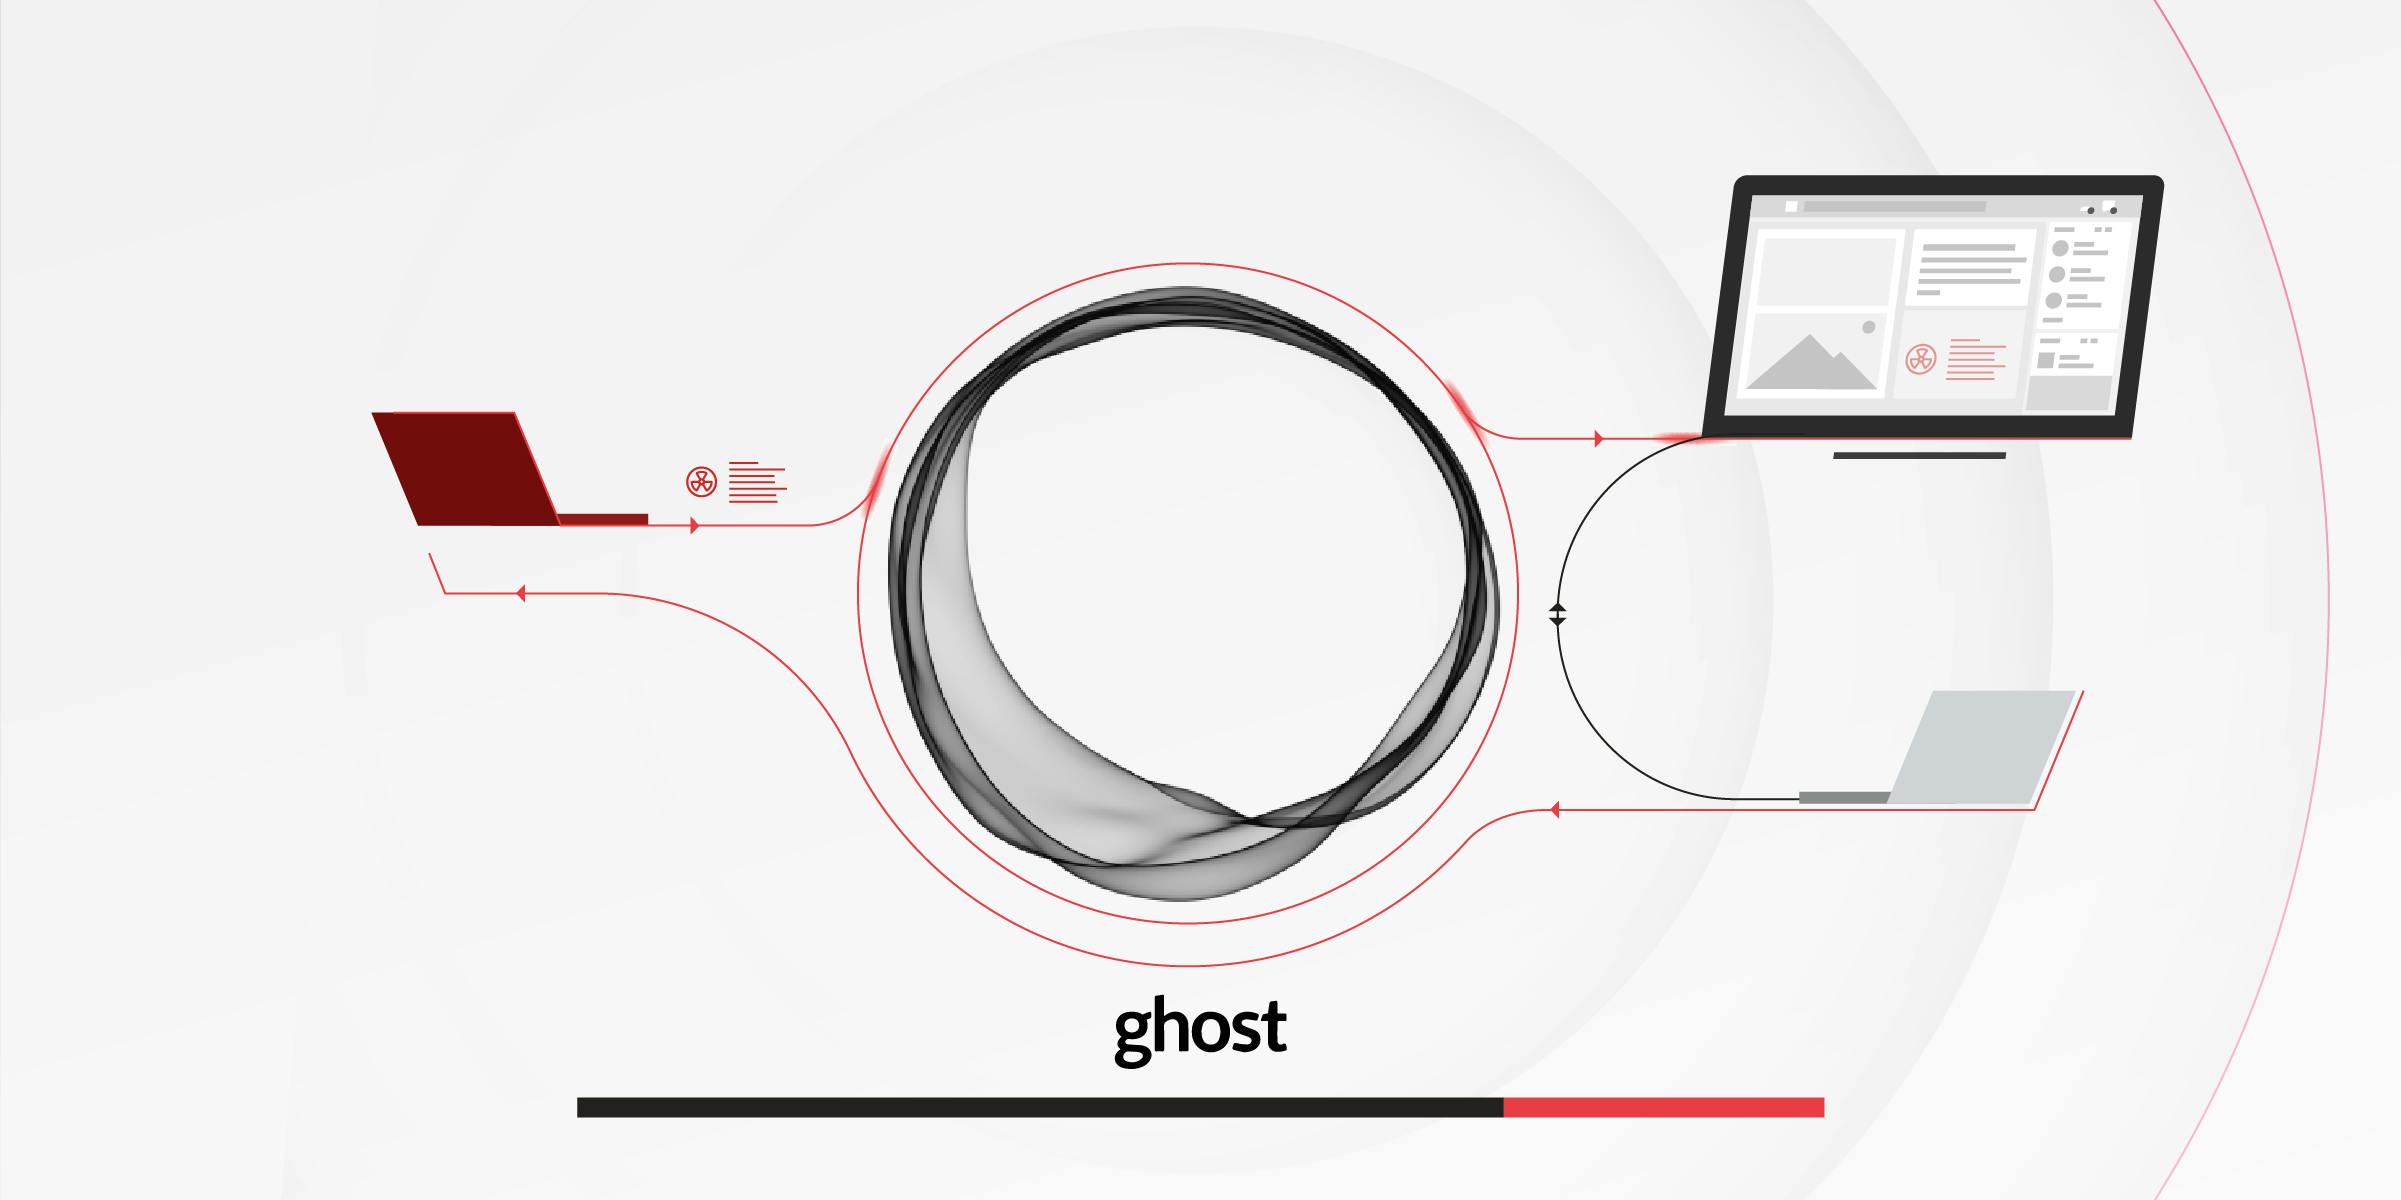 An unauthenticated attacker compromises a Ghost user